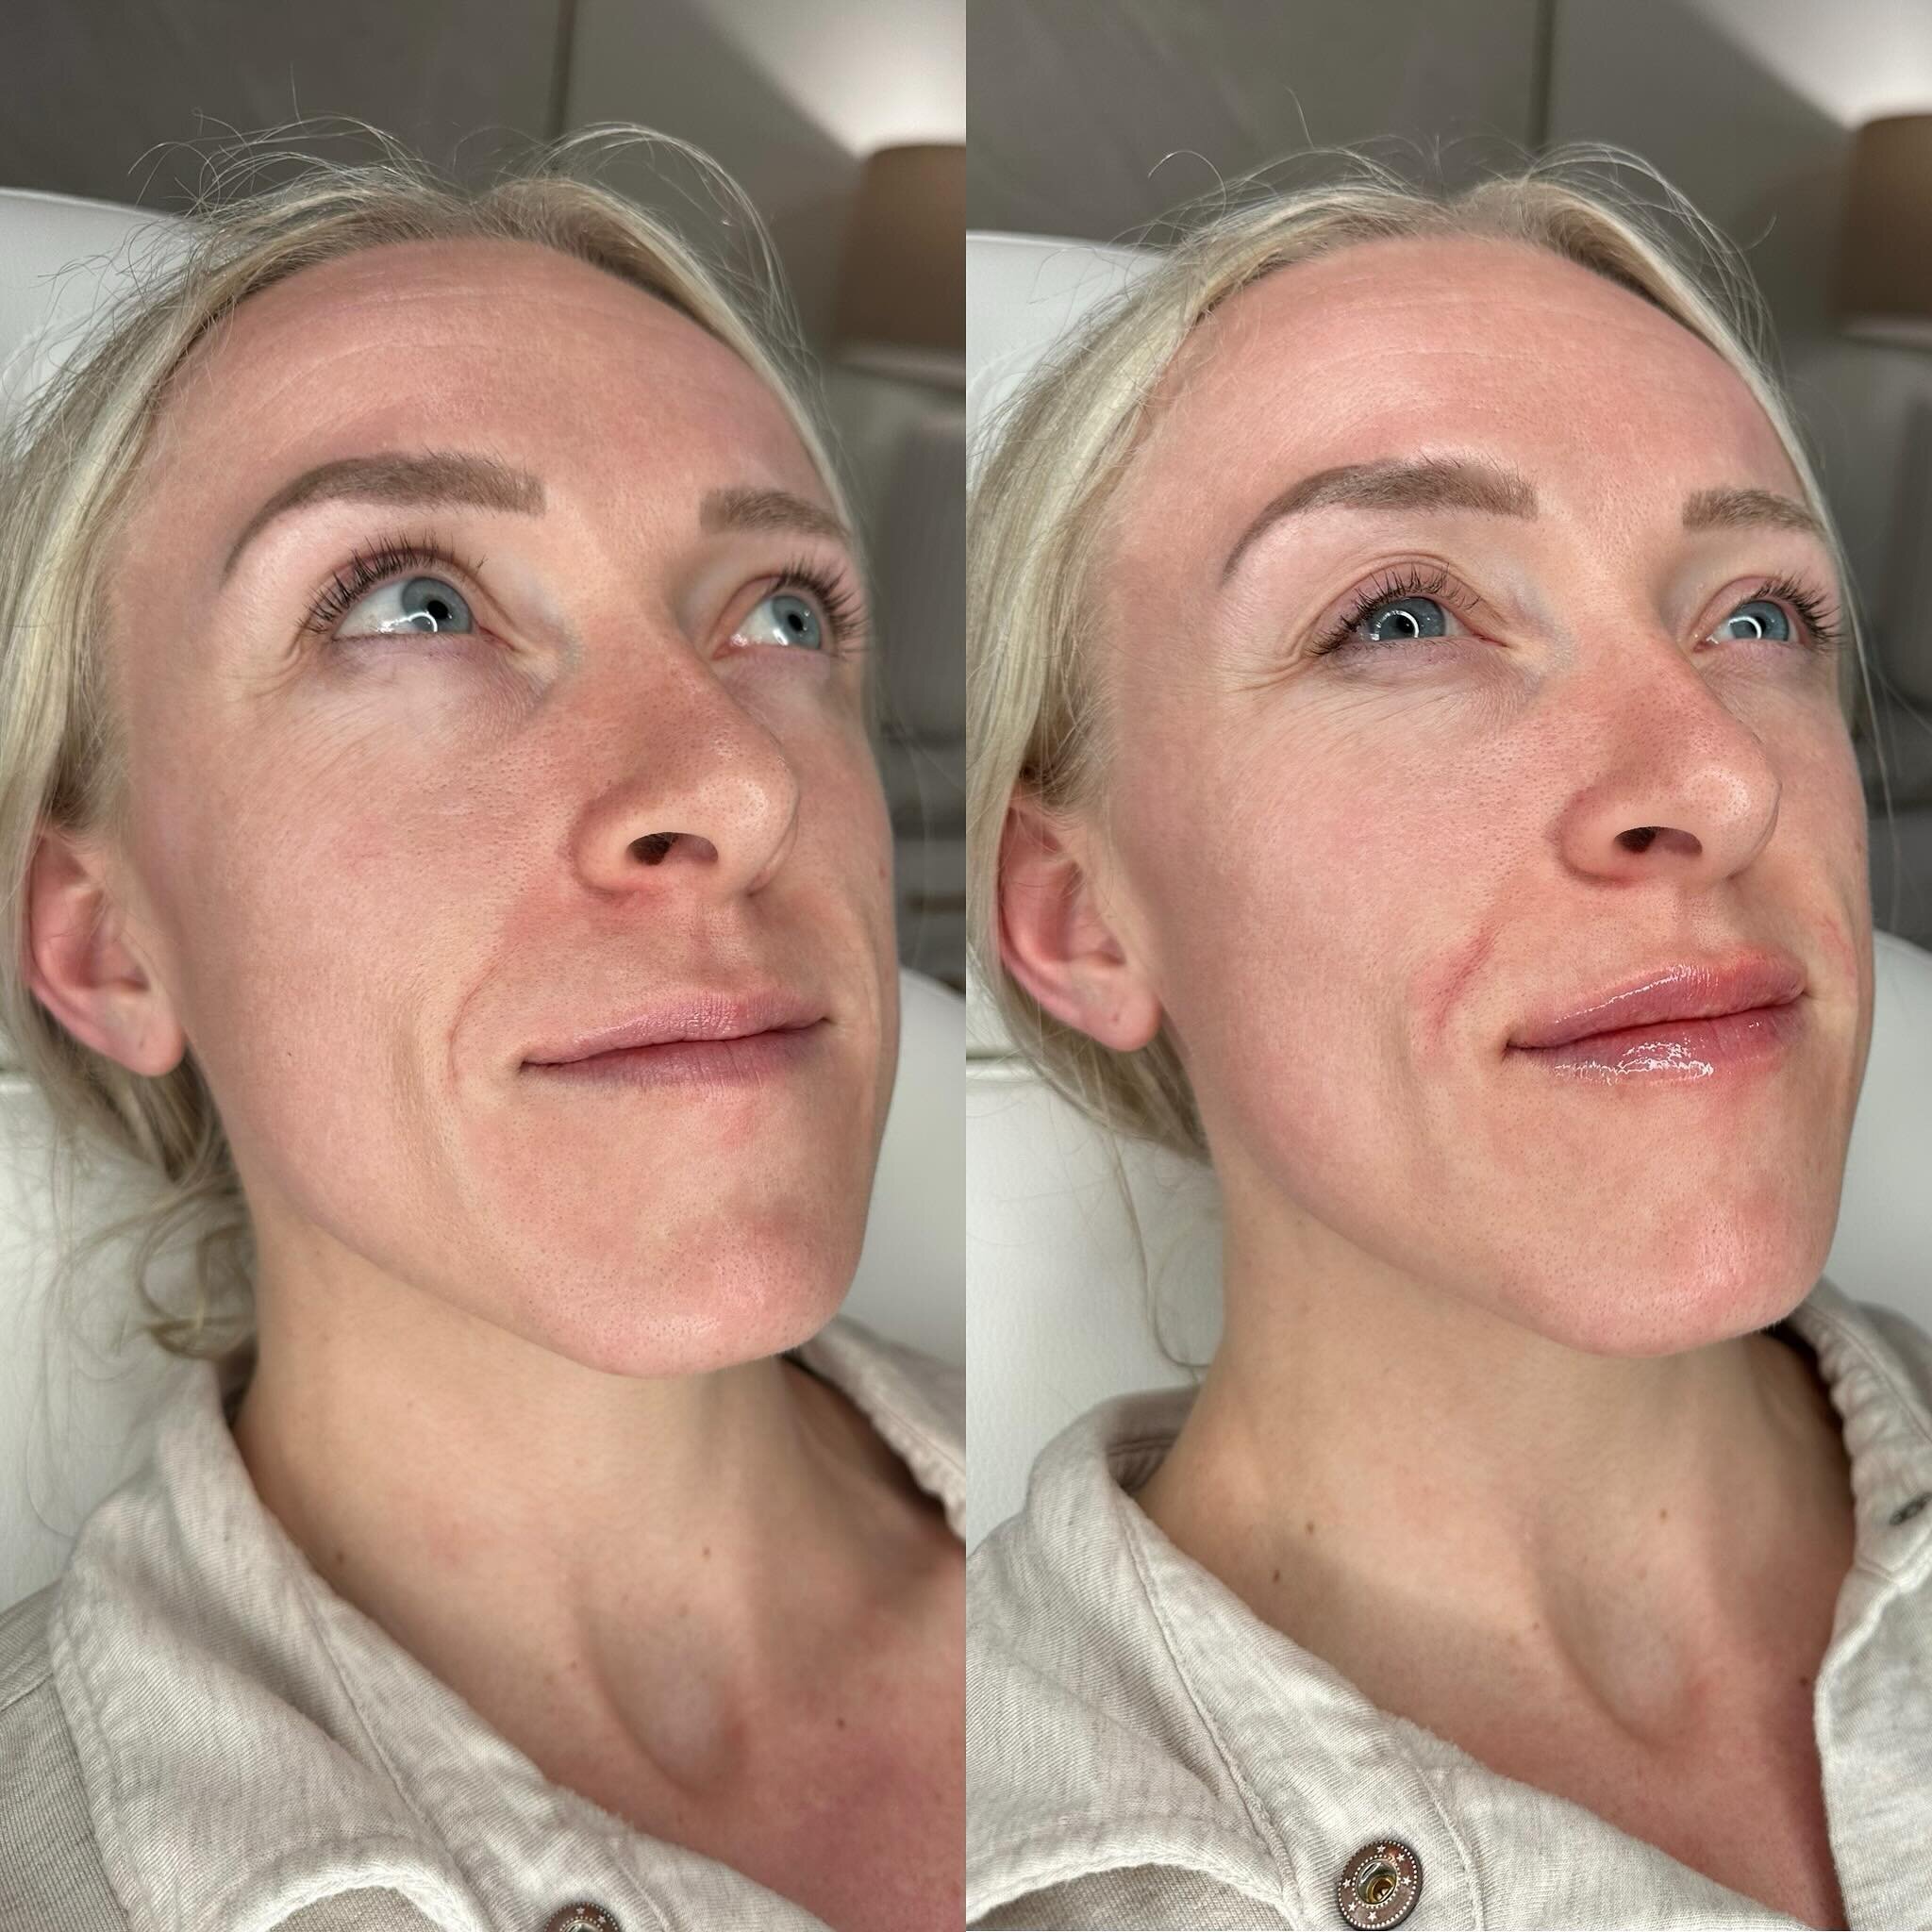 Lip filler appreciation post 👏 I&rsquo;m obsessed with what lips can do for the entire face! She&rsquo;s stunning before and after! But our favorite part? Her upper lip no longer disappears when she smiles 🥹

Lips DO NOT have to look unnatural. 
I 